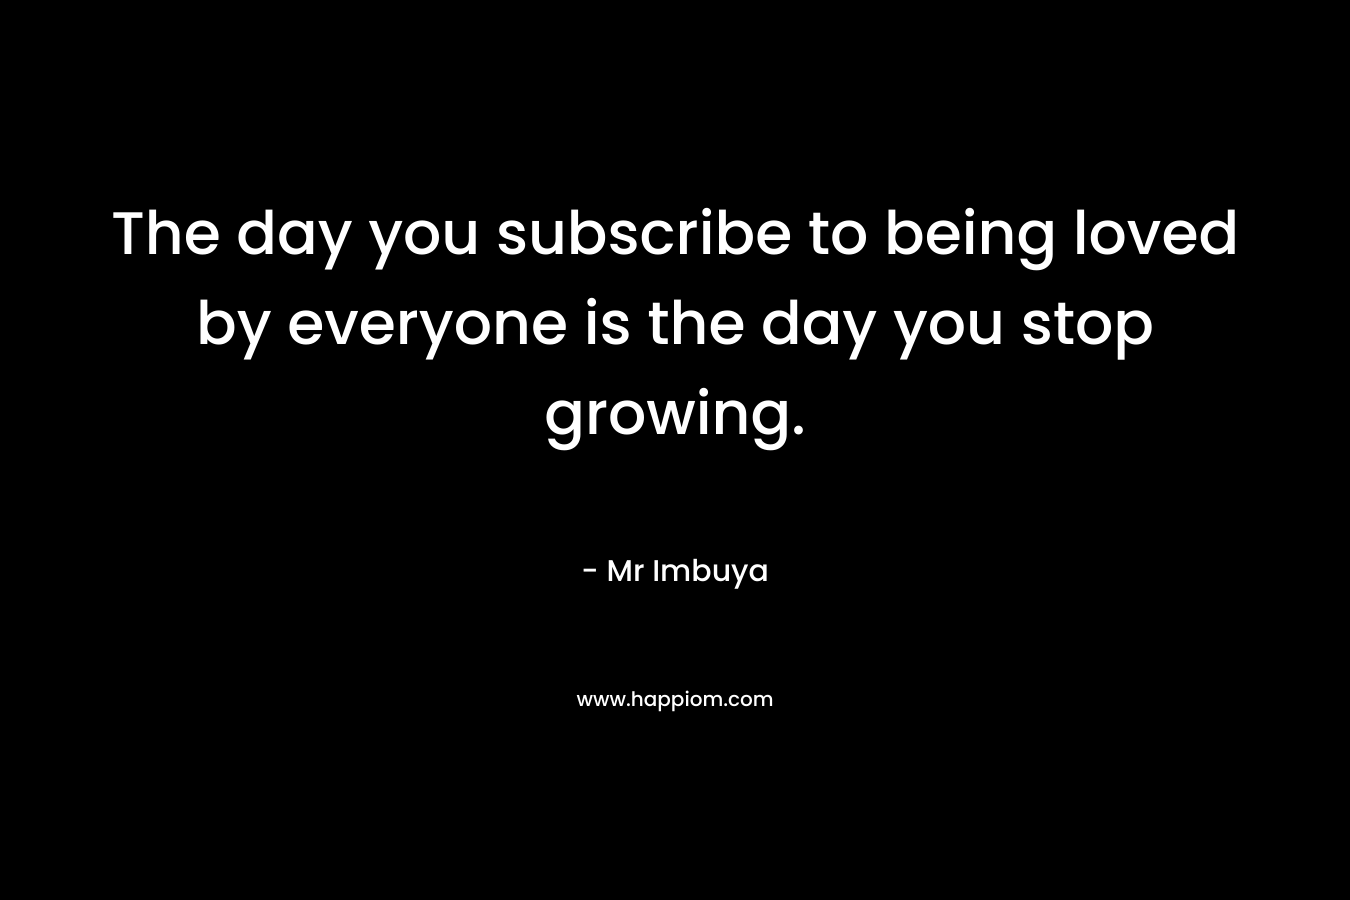 The day you subscribe to being loved by everyone is the day you stop growing. – Mr Imbuya